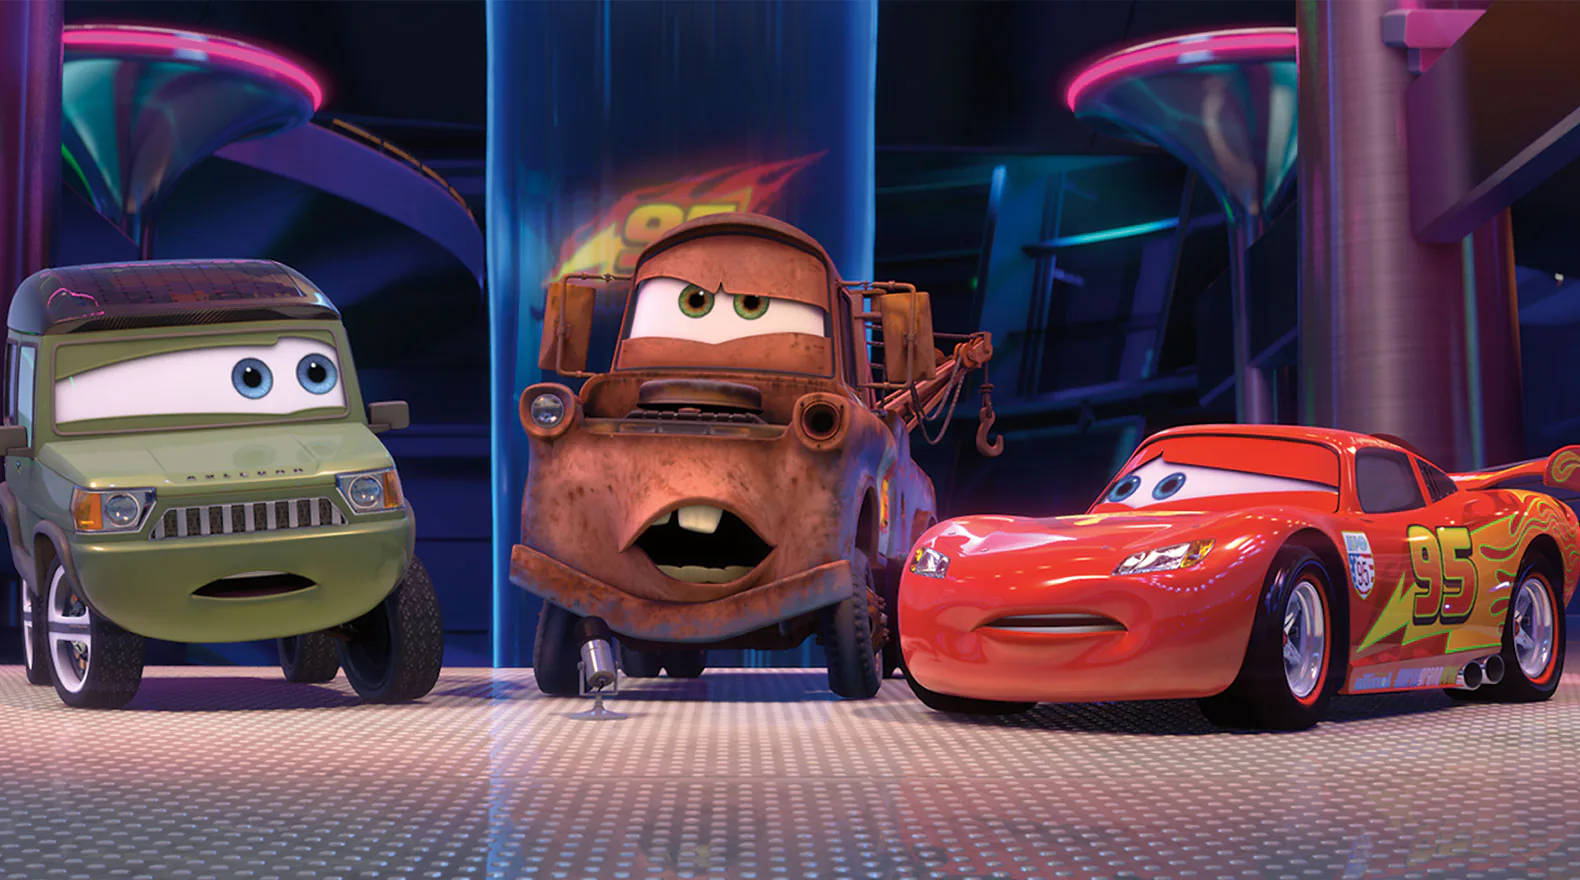 Exciting Adventure with Disney Cars Sarge, Lightning McQueen, And Mater Wallpaper